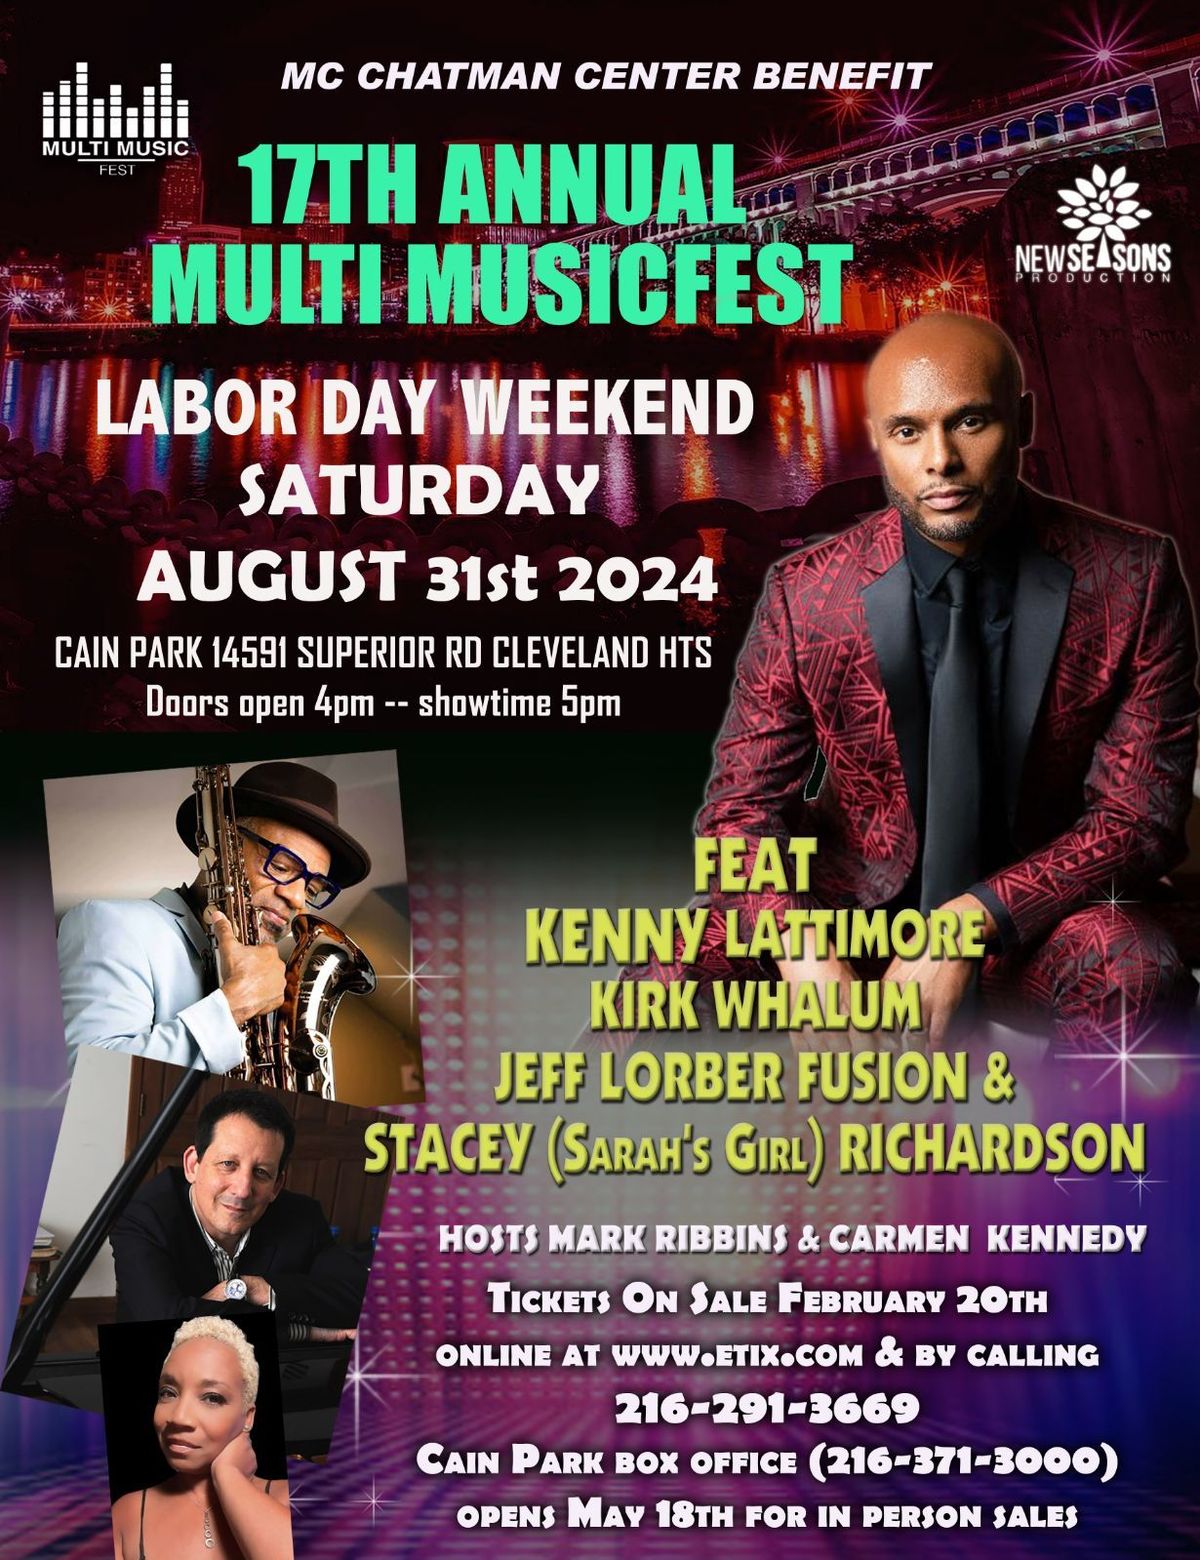 17th Annual Multi MusicFest featuring Jeff Lorber Fusion, Kirk Whalum, Kenny Lattimore and more